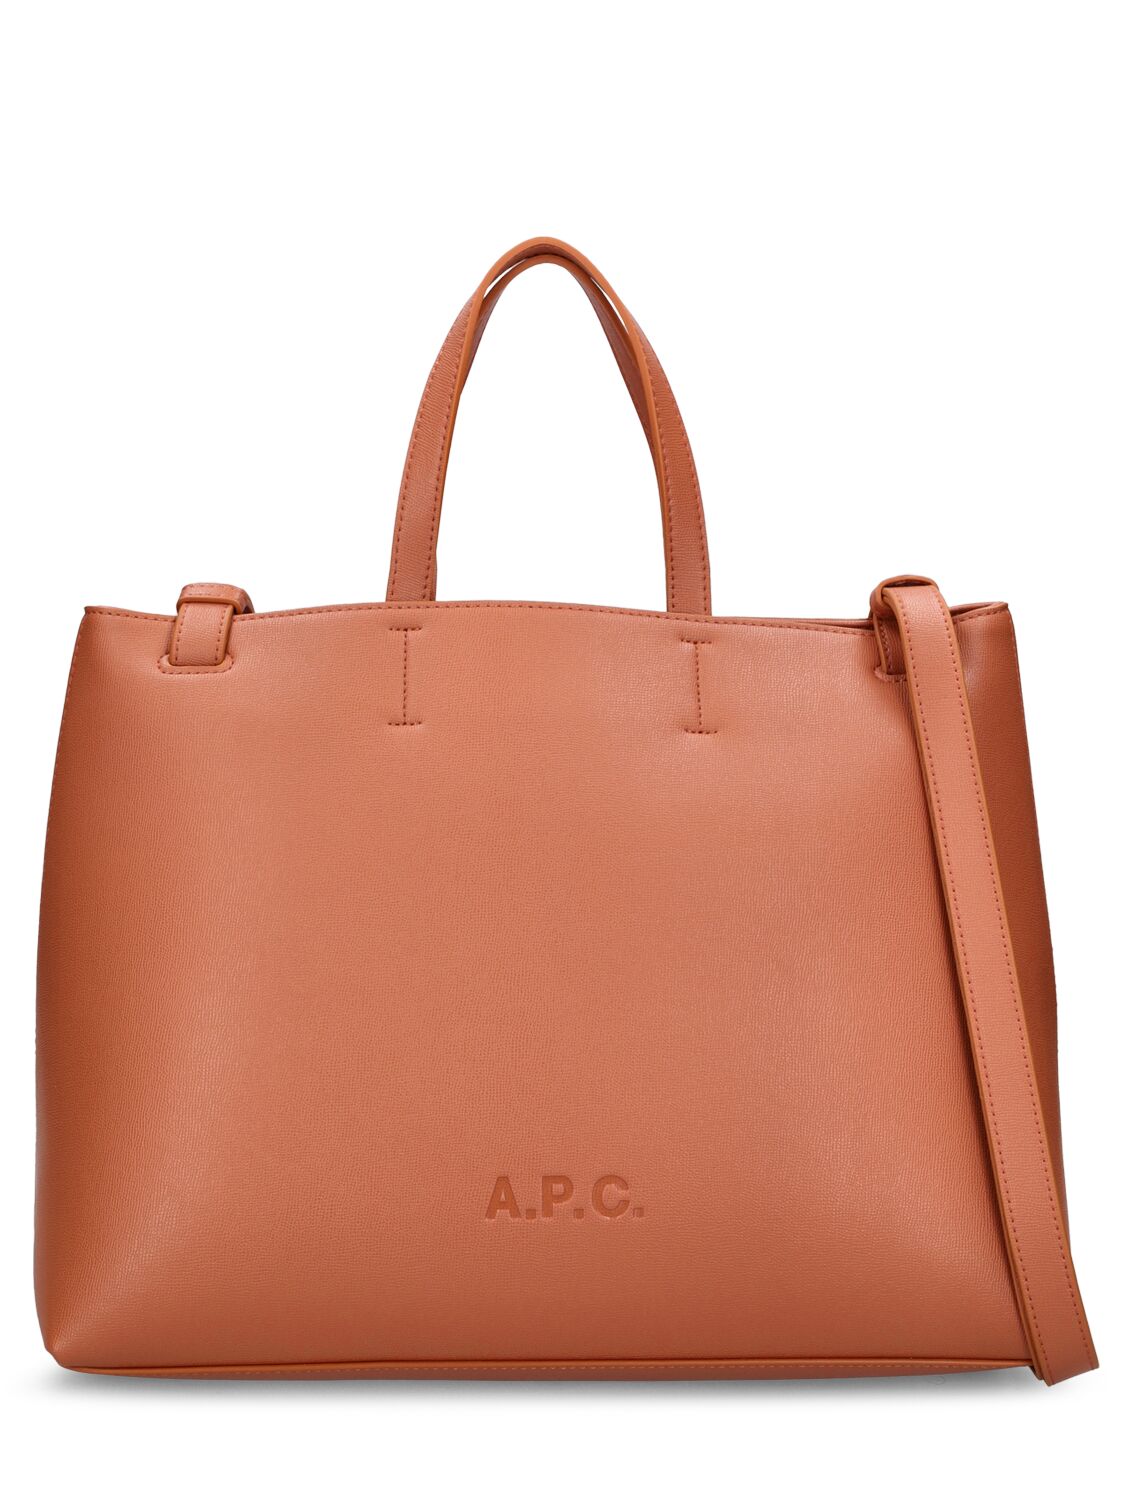 Apc Small Cabas Market Leather Bag In Caramel